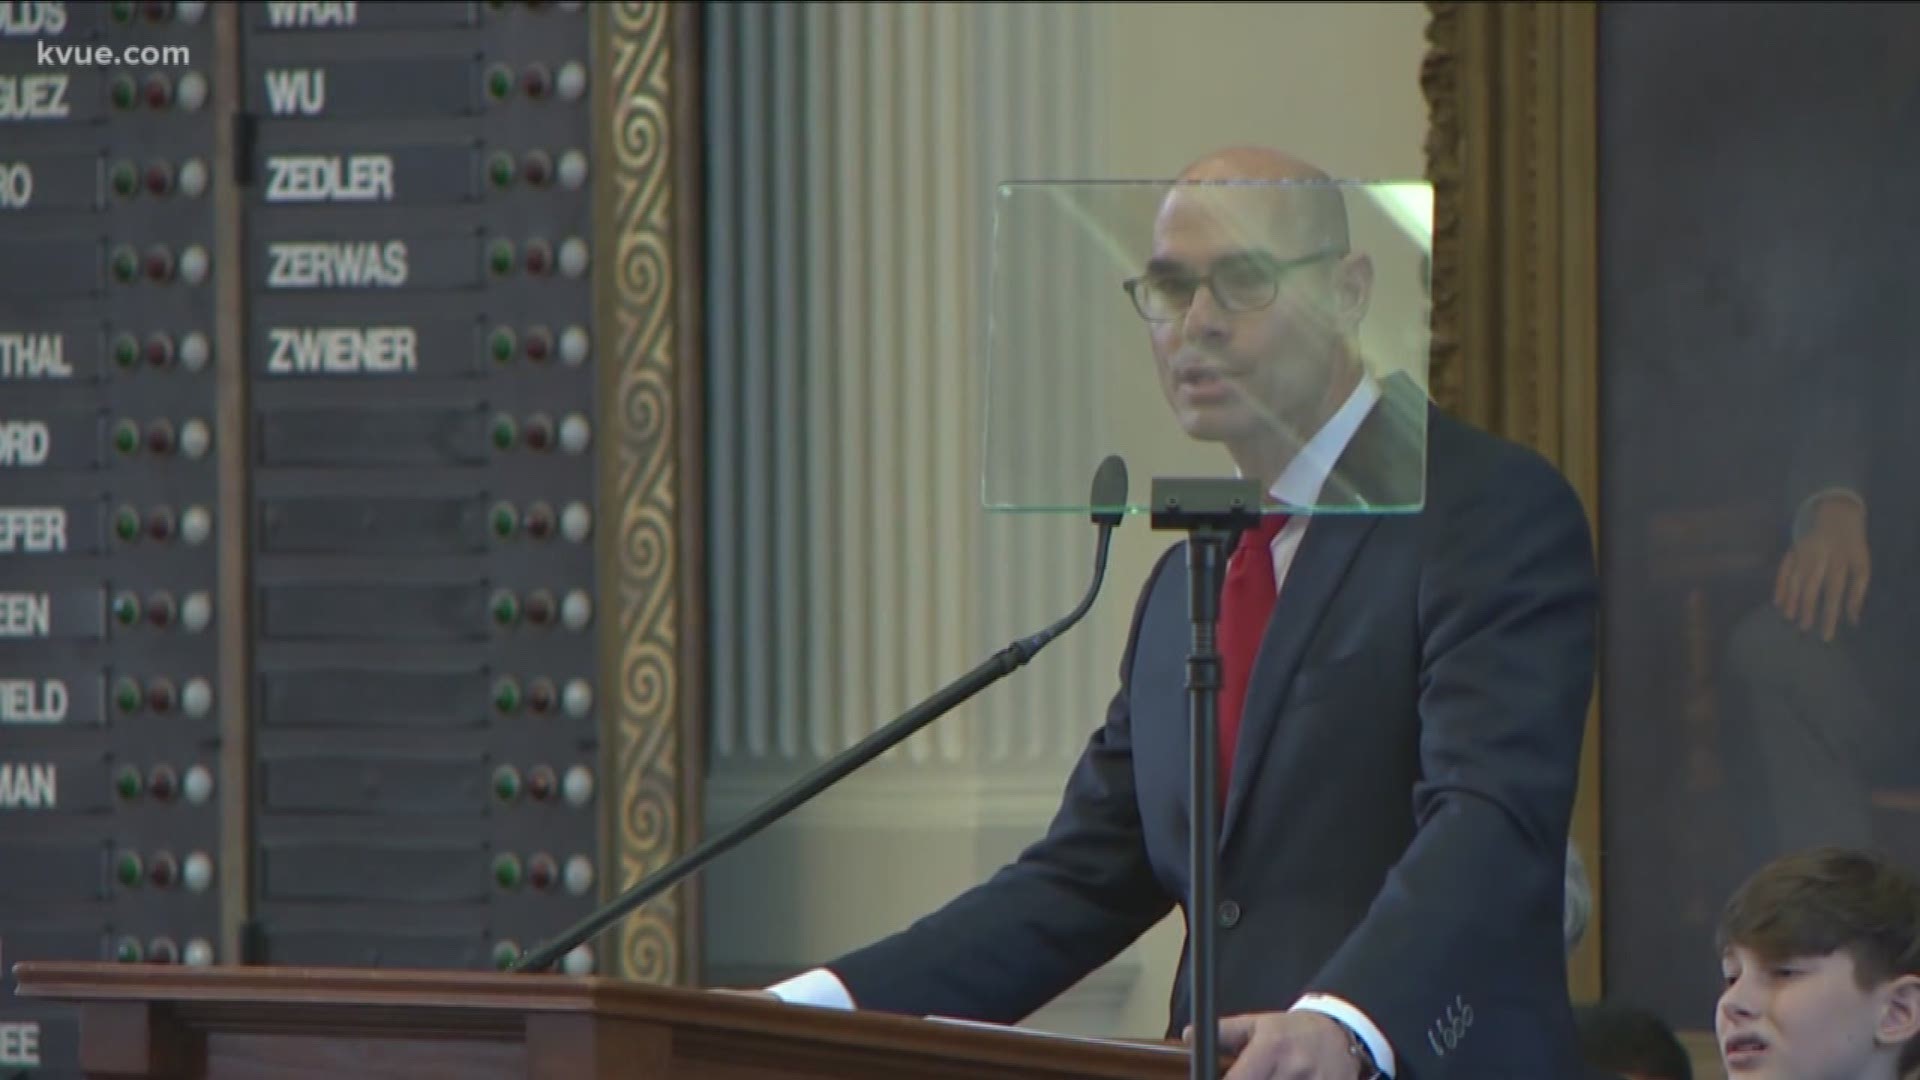 Republican Dennis Bonnen will lead the House this session. He represents Angleton which is outside of Houston.